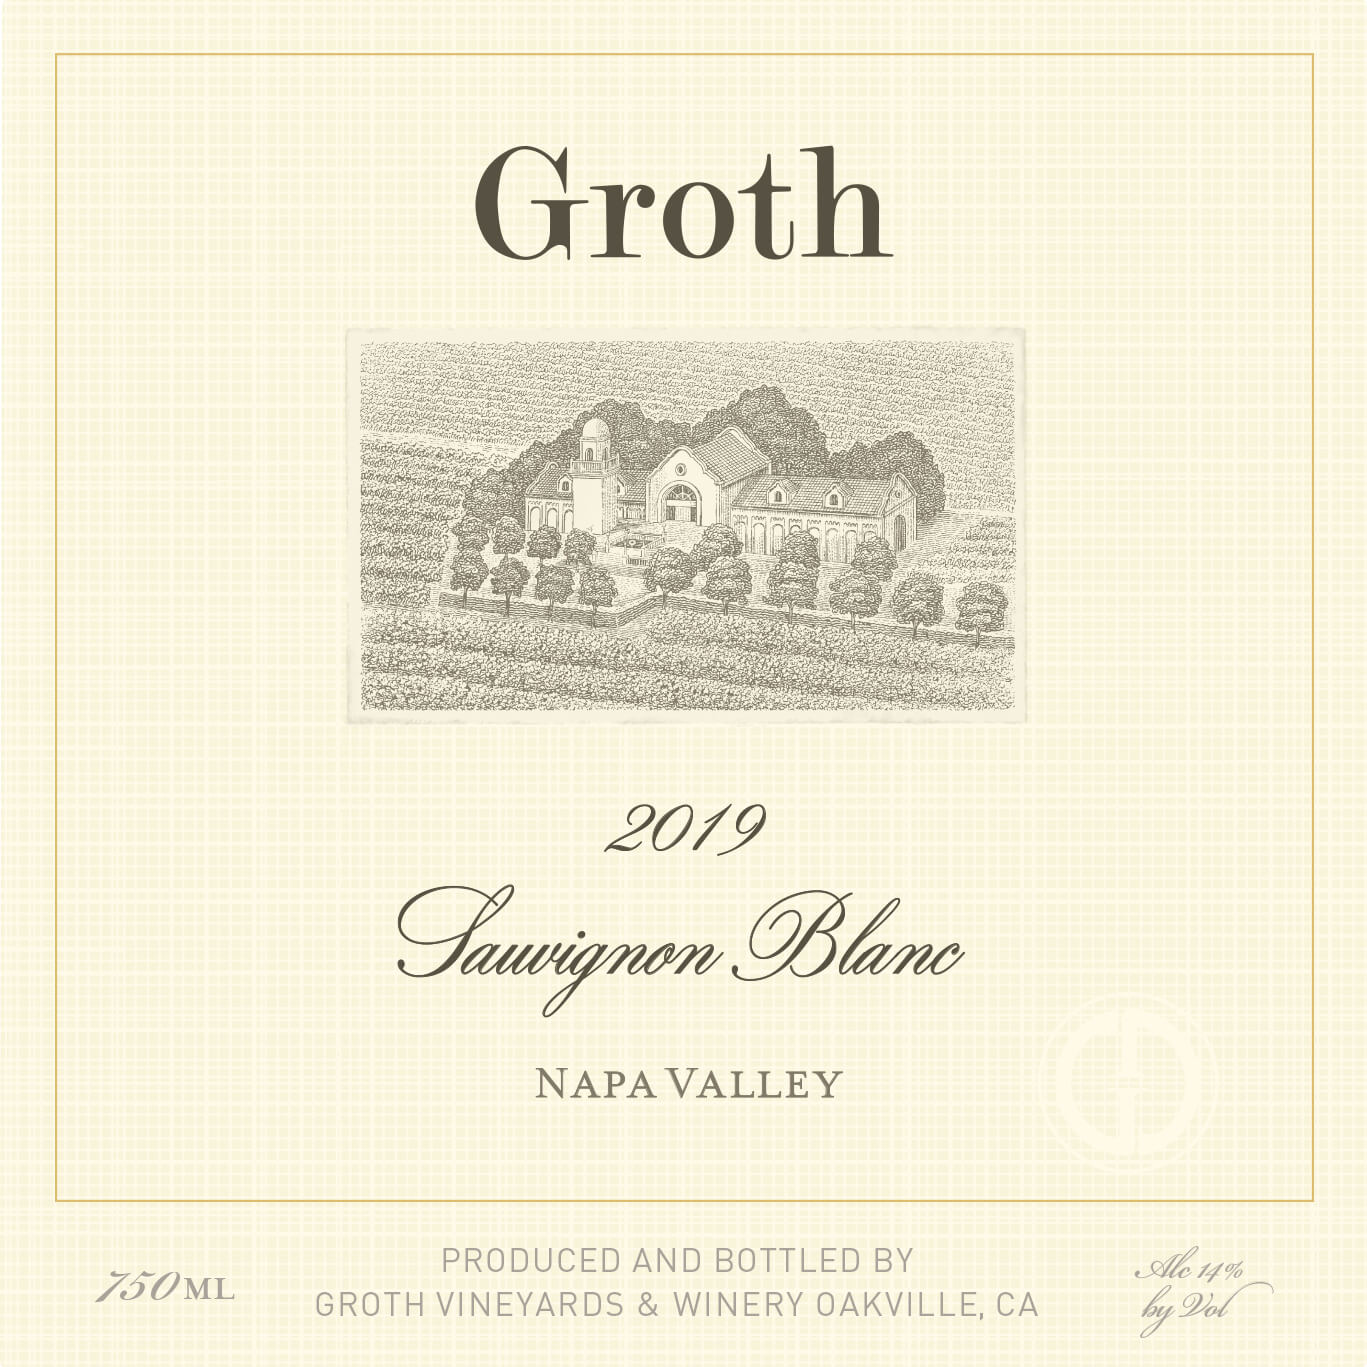 Brand Assets and Information - Groth Vineyards & Winery